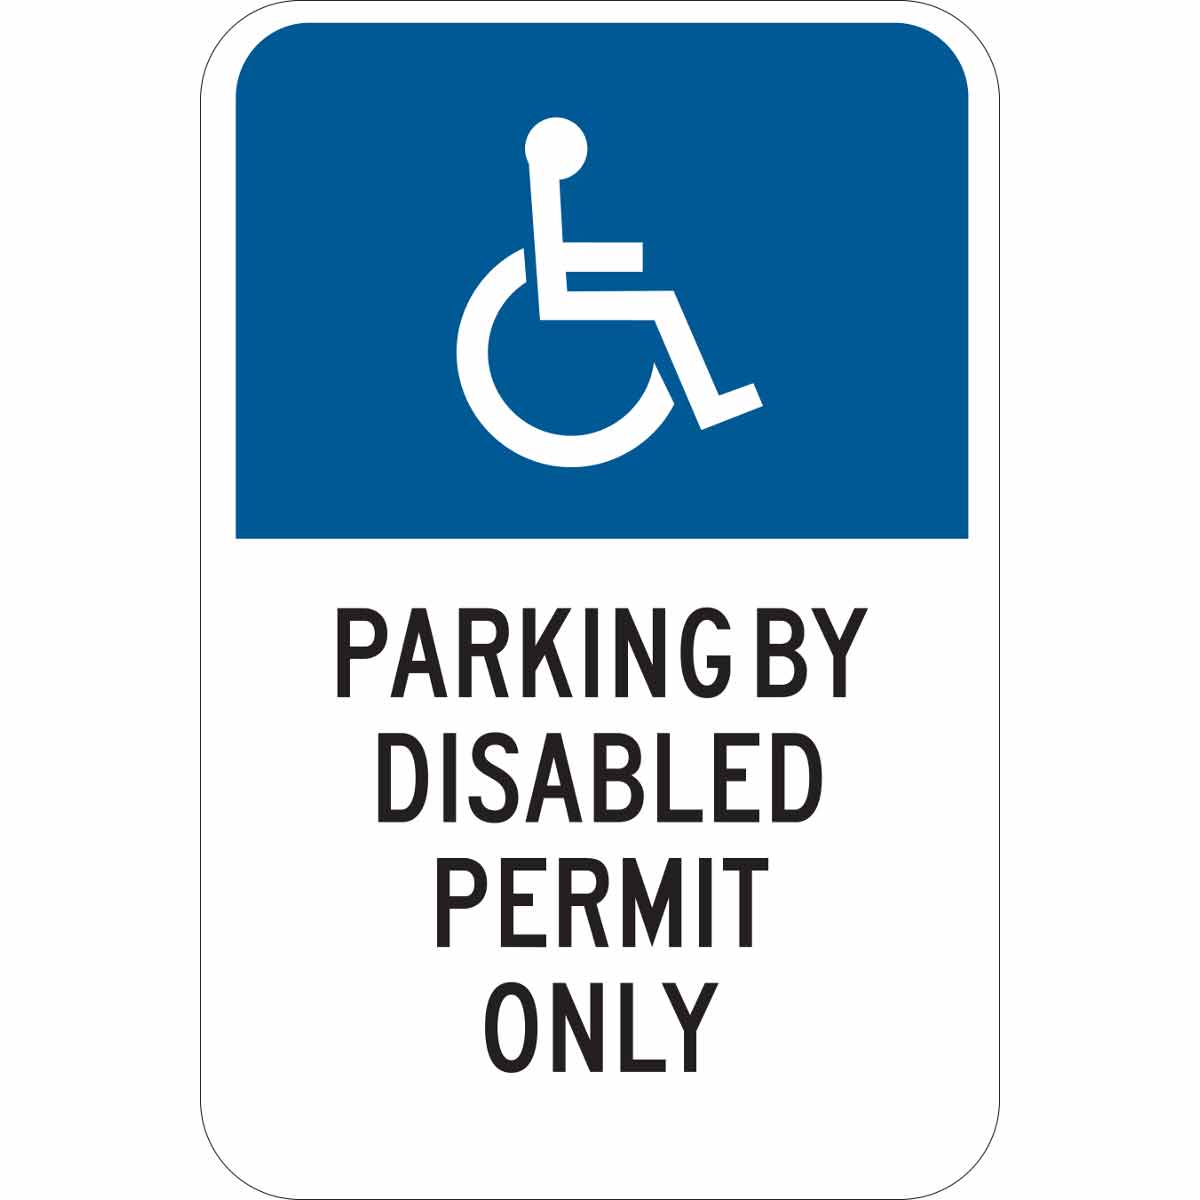 Disabled parking only safety sign 